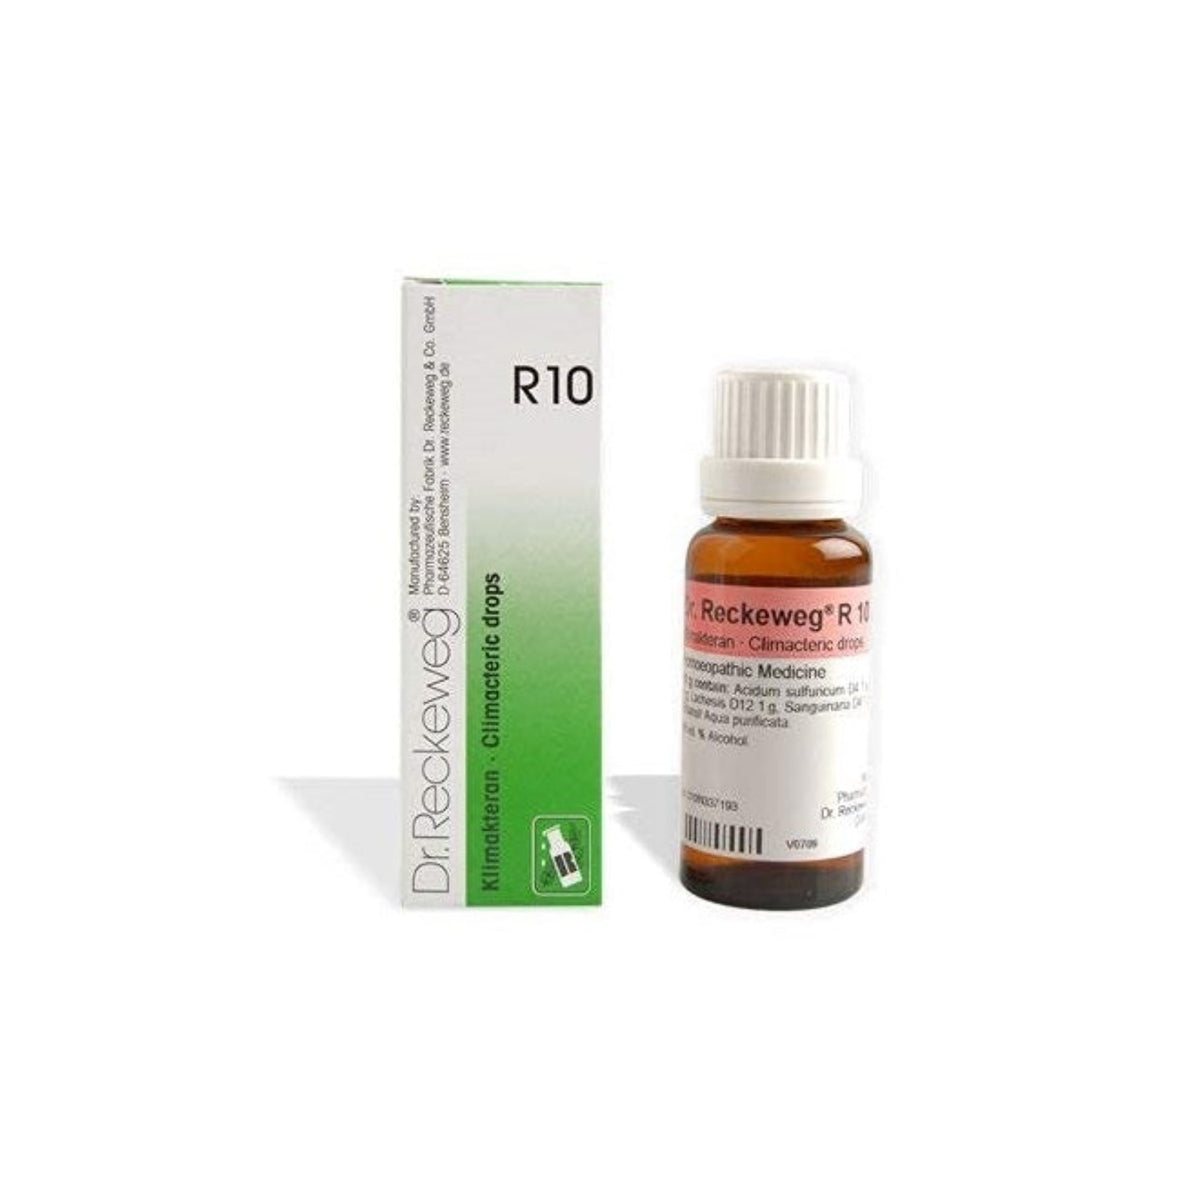 Dr Reckeweg Homoeopathy R10 Climacteric Drops 22 ml